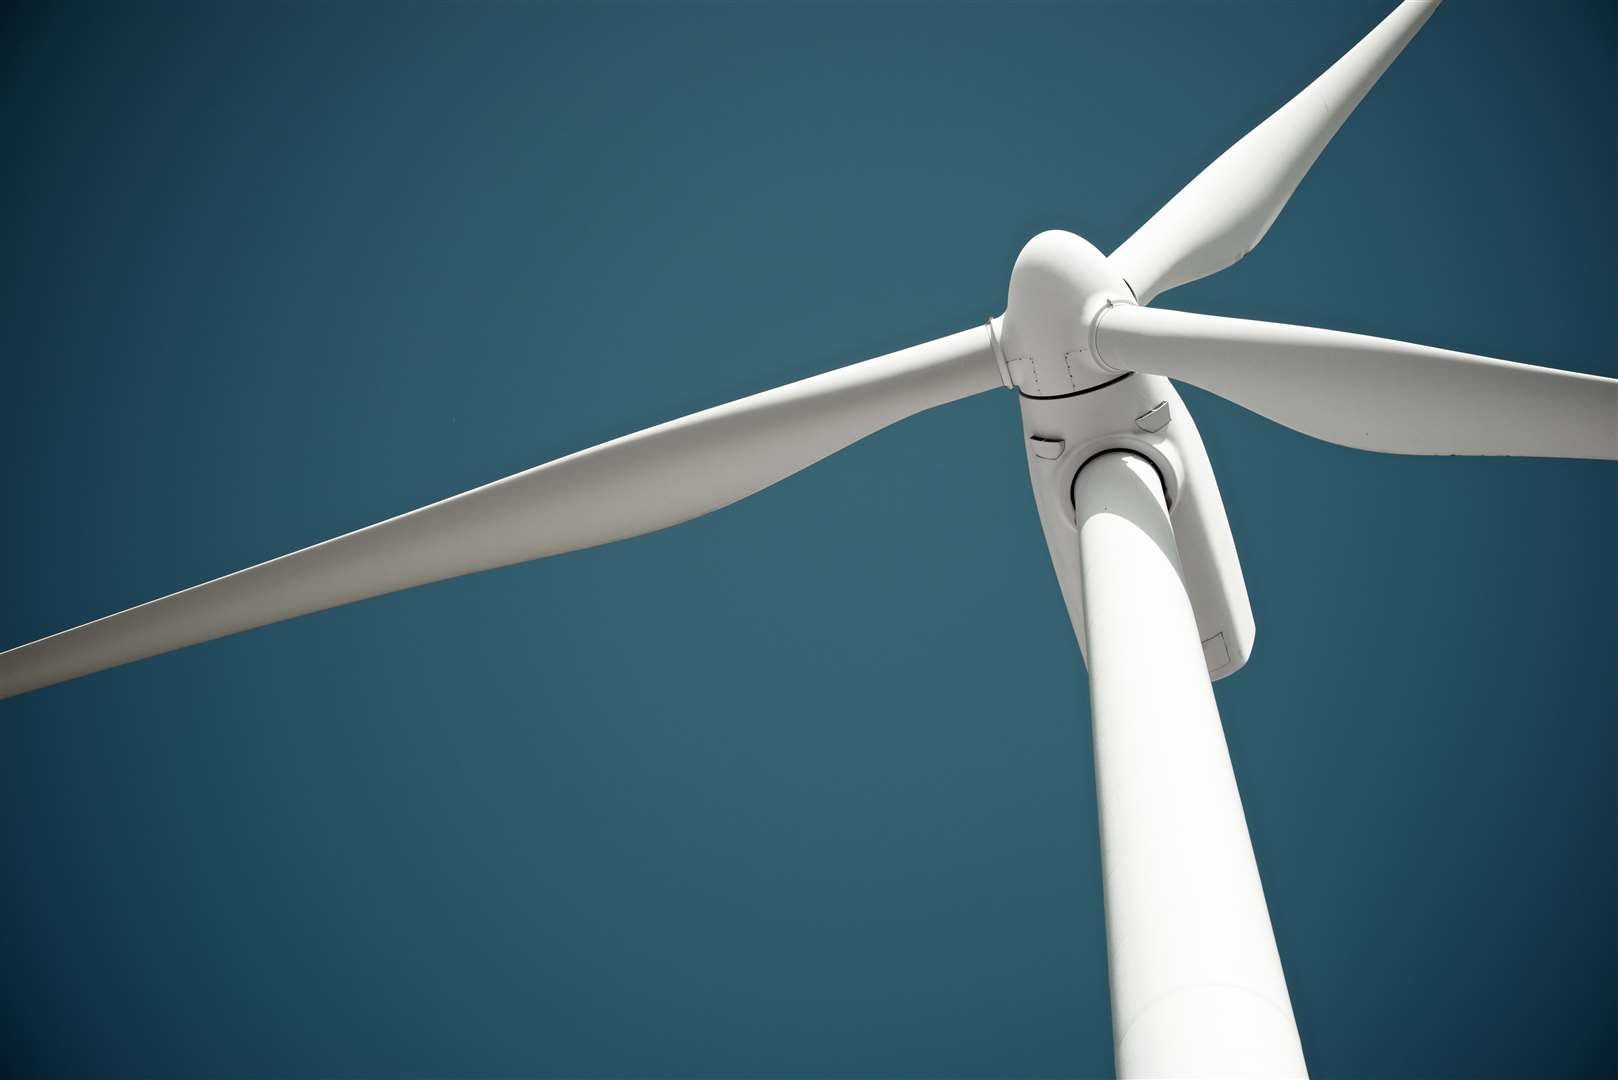 The plan proposes two wind turbines with battery storage